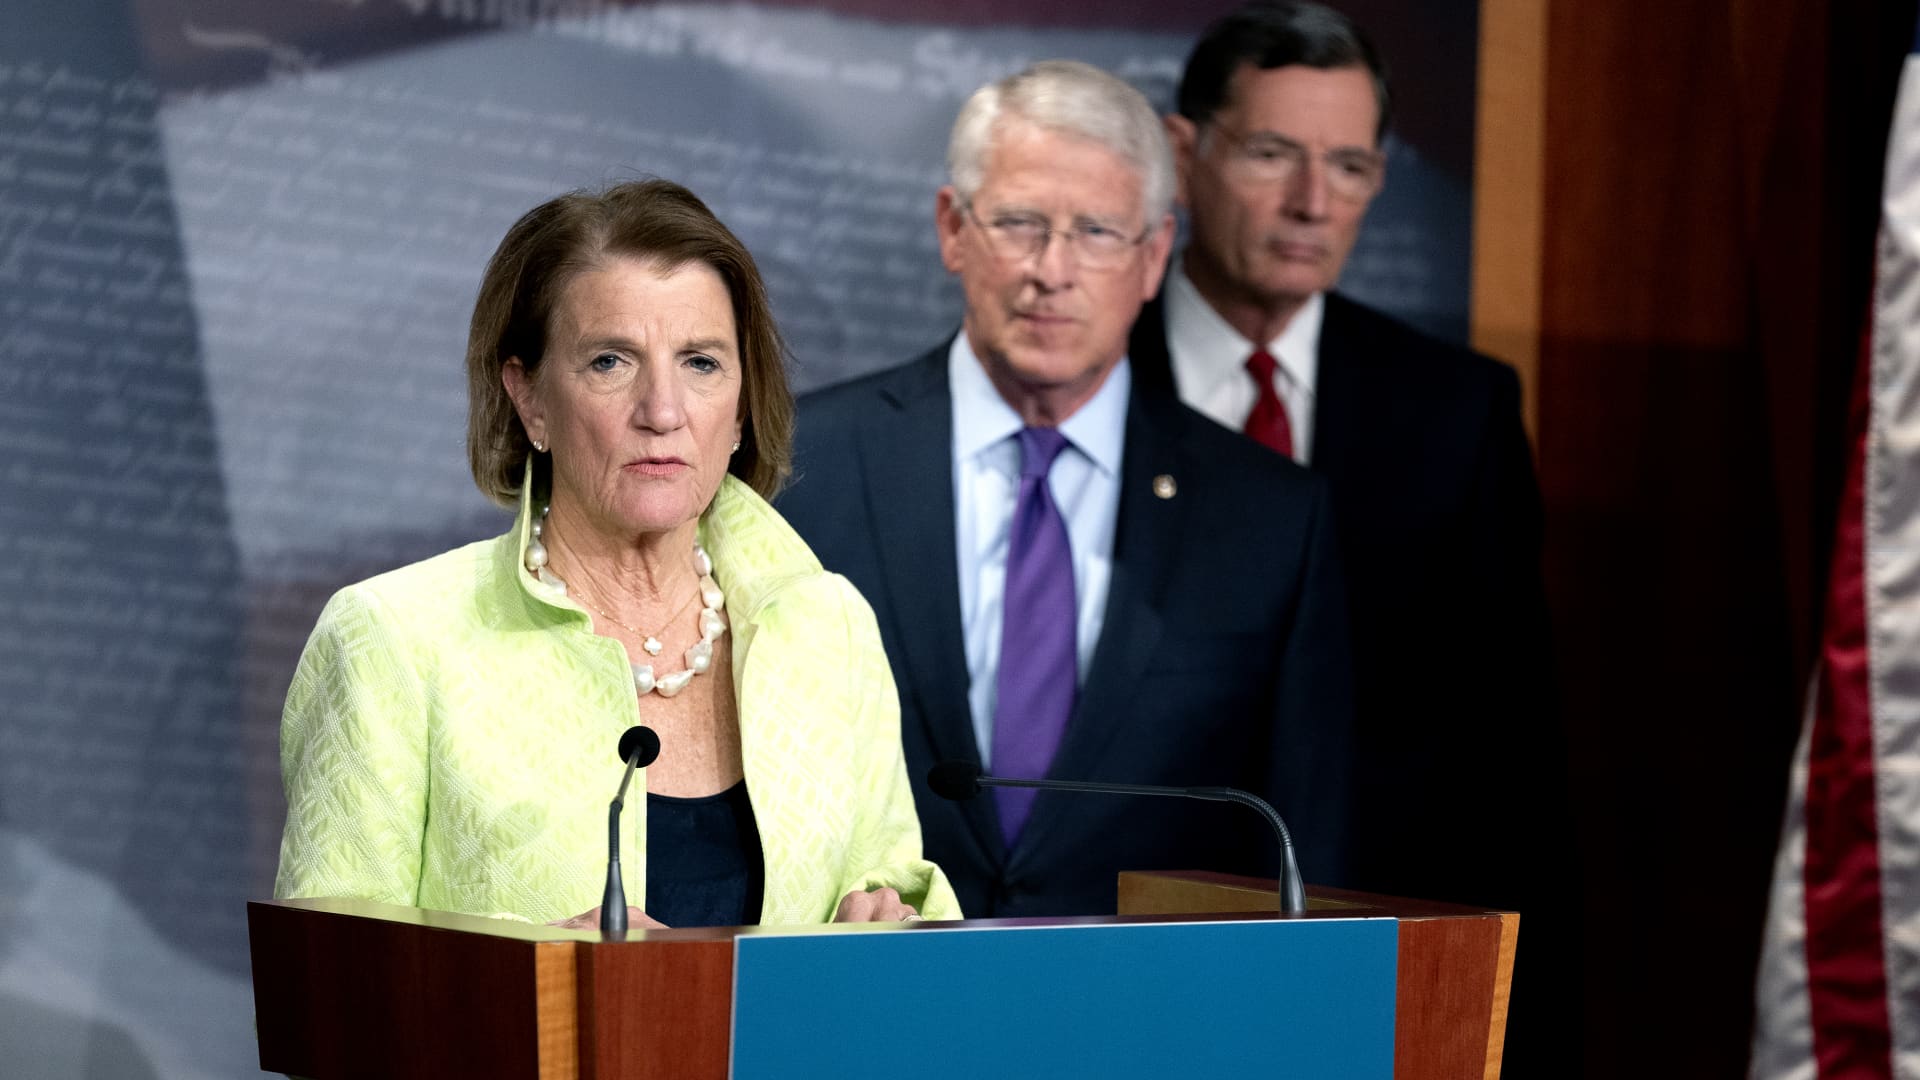 Senator Shelley Moore Capito, a Republican from West Virginia, left, speaks as Senator Roger Wicker, a Republican from Mississippi, center, and Senator John Barrasso, a Republican from Wyoming, listen during a news conference on Capitol Hill in Washington, D.C., U.S., on Thursday, April 22, 2021.